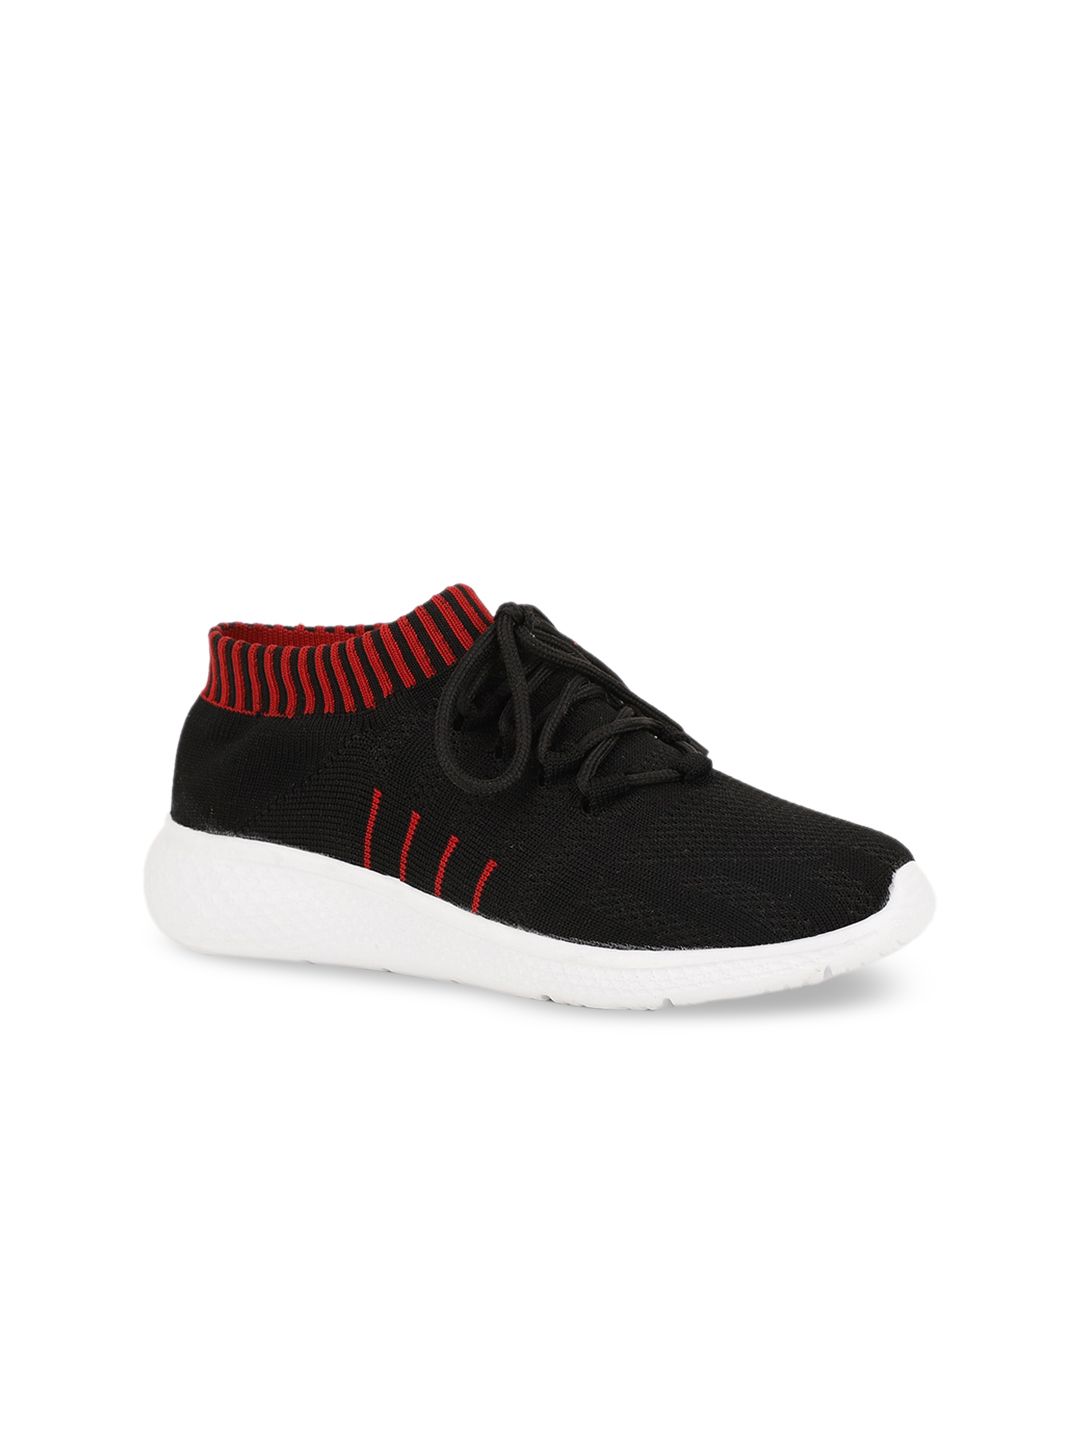 HERE&NOW Women Black Woven Design Sneakers Price in India